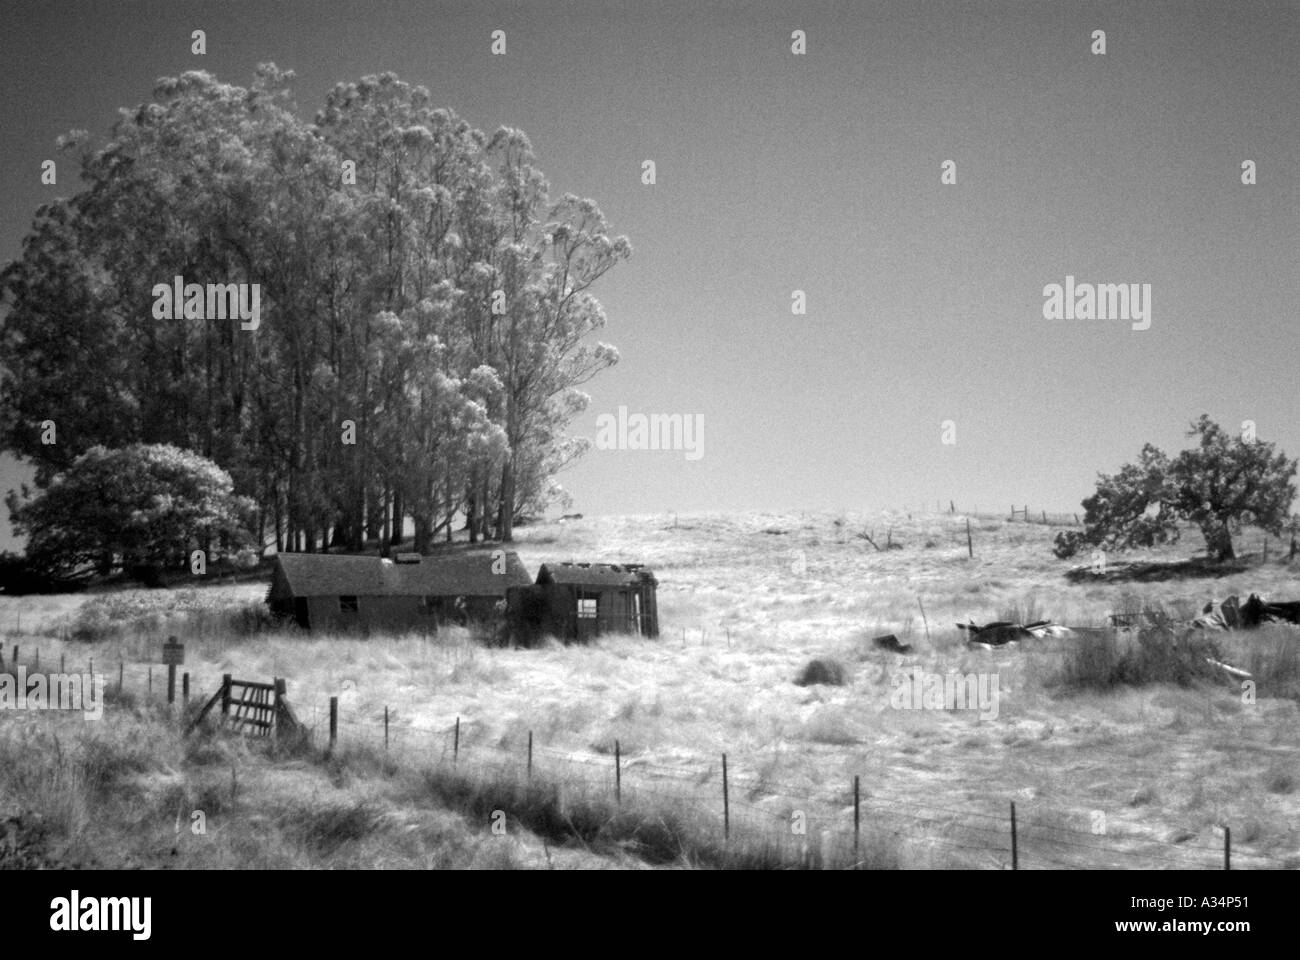 Grainy infrared black and white photograph of a group of trees and old wooden buildings in Sonoma County California USA  Stock Photo